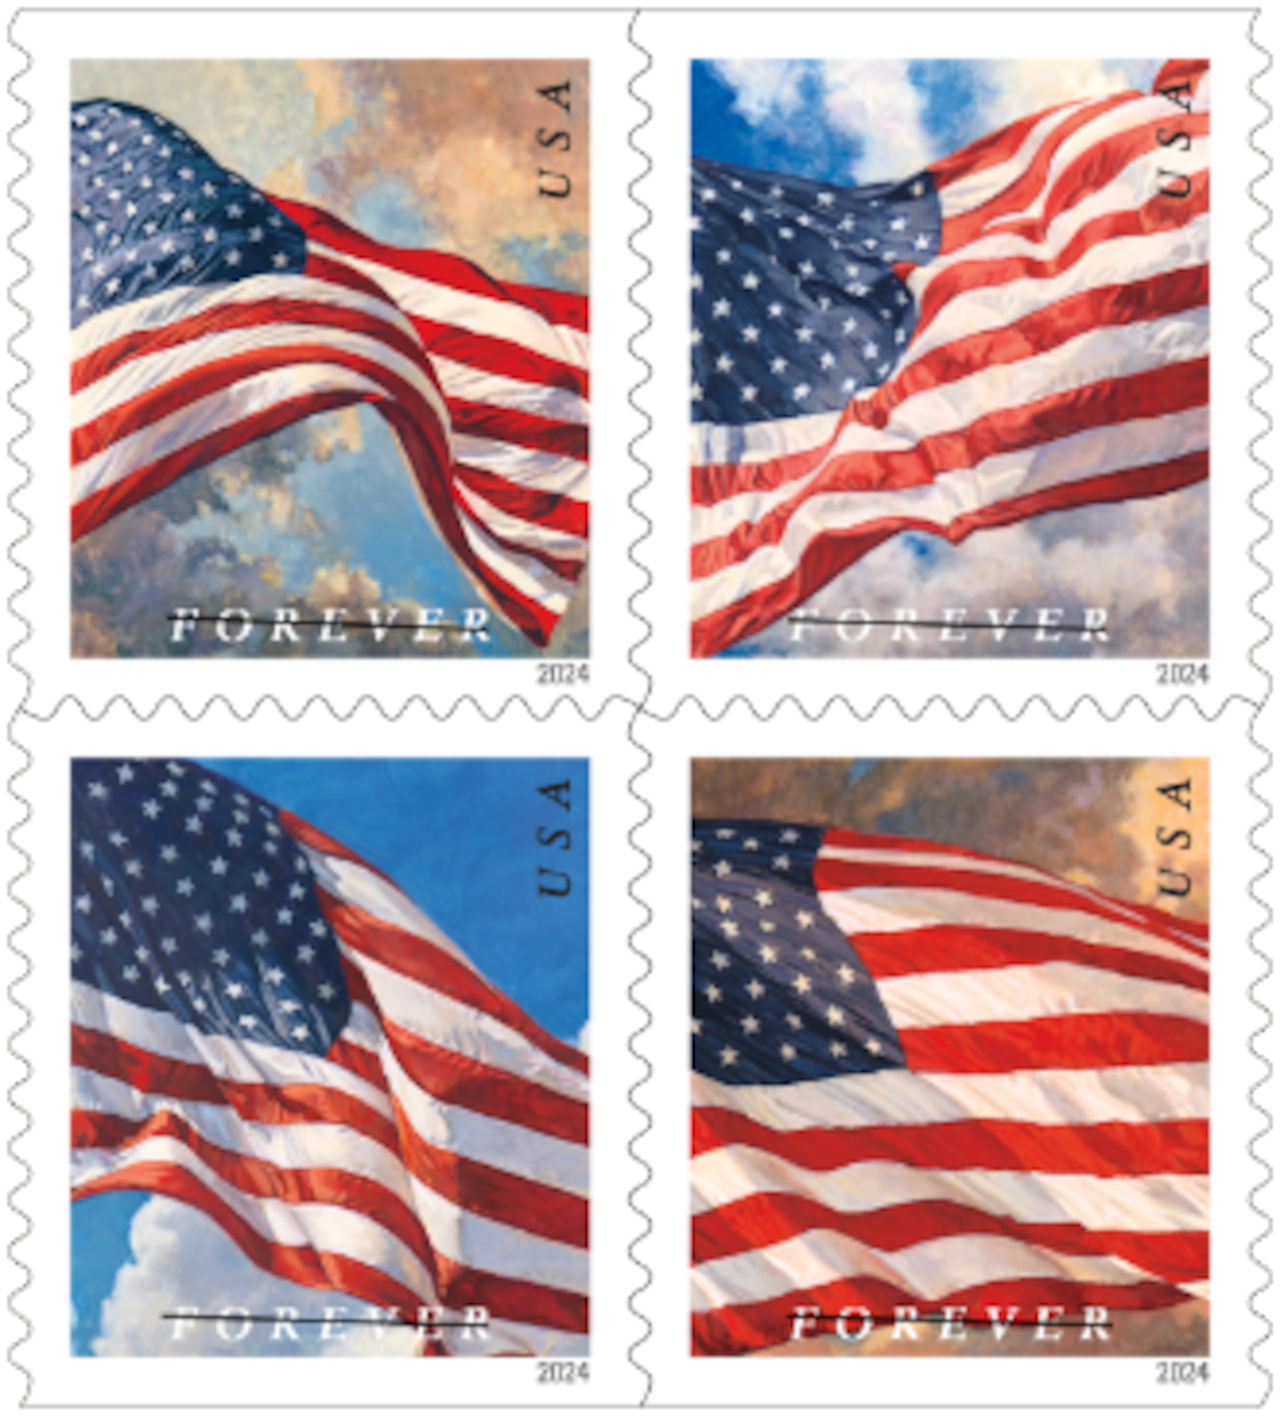 Bogus stamps sold at deep discounts on the rise, USPS says [Video]